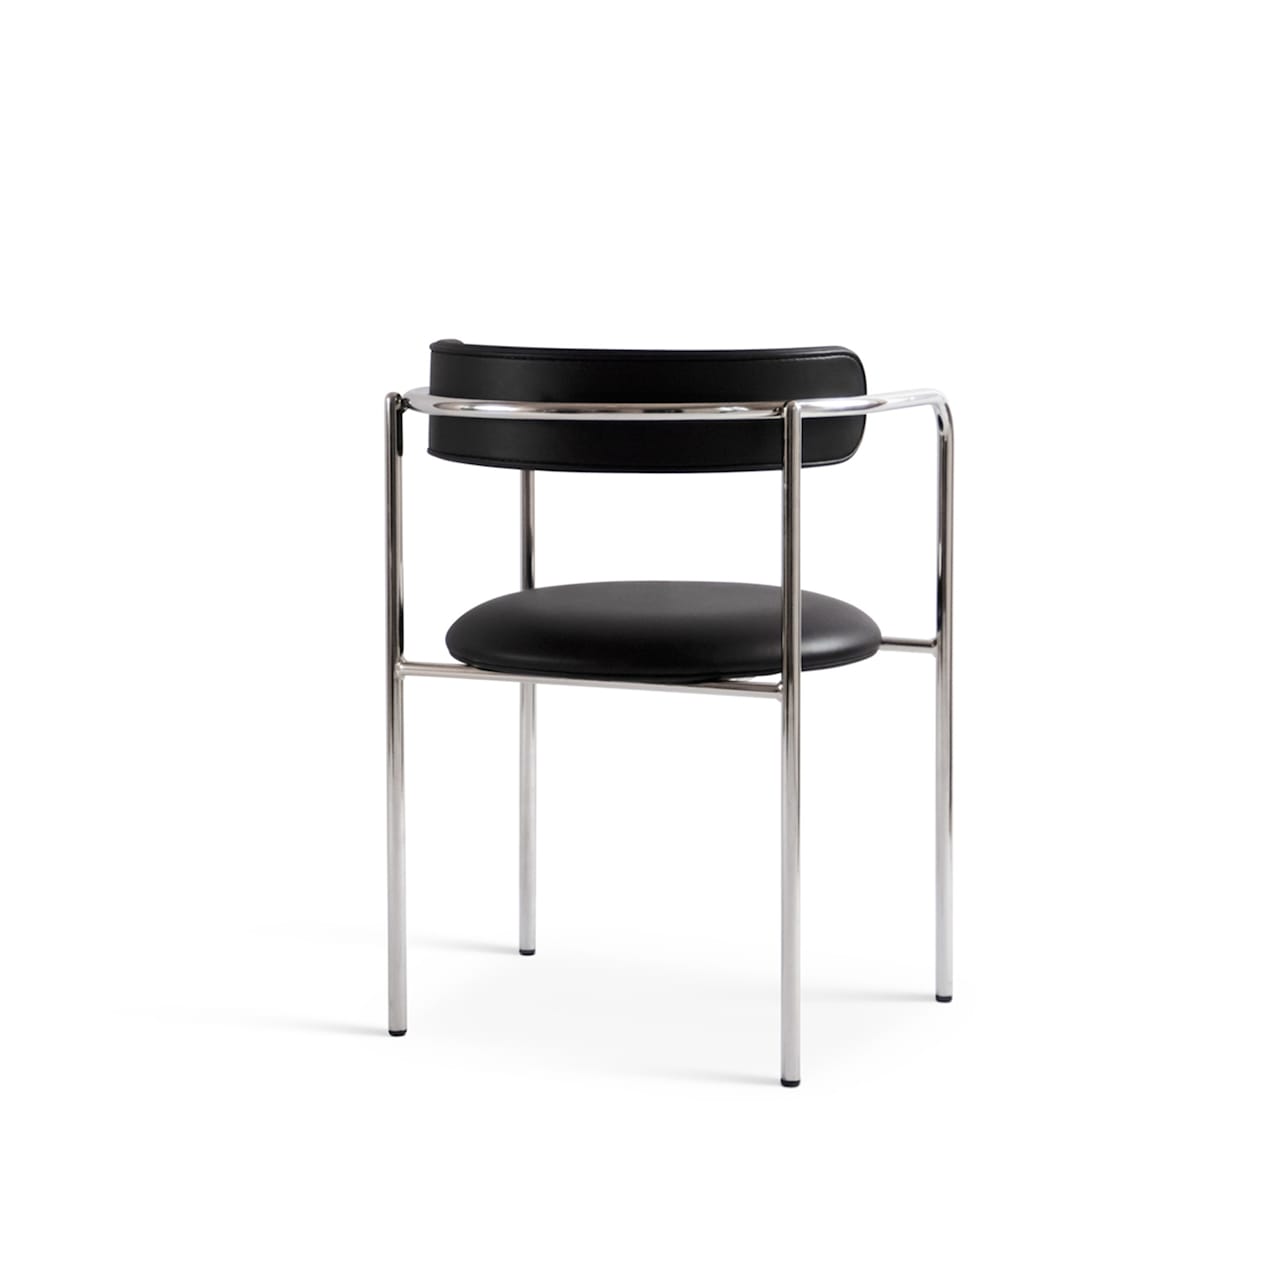 FF Chair Rounded Chrome Legs